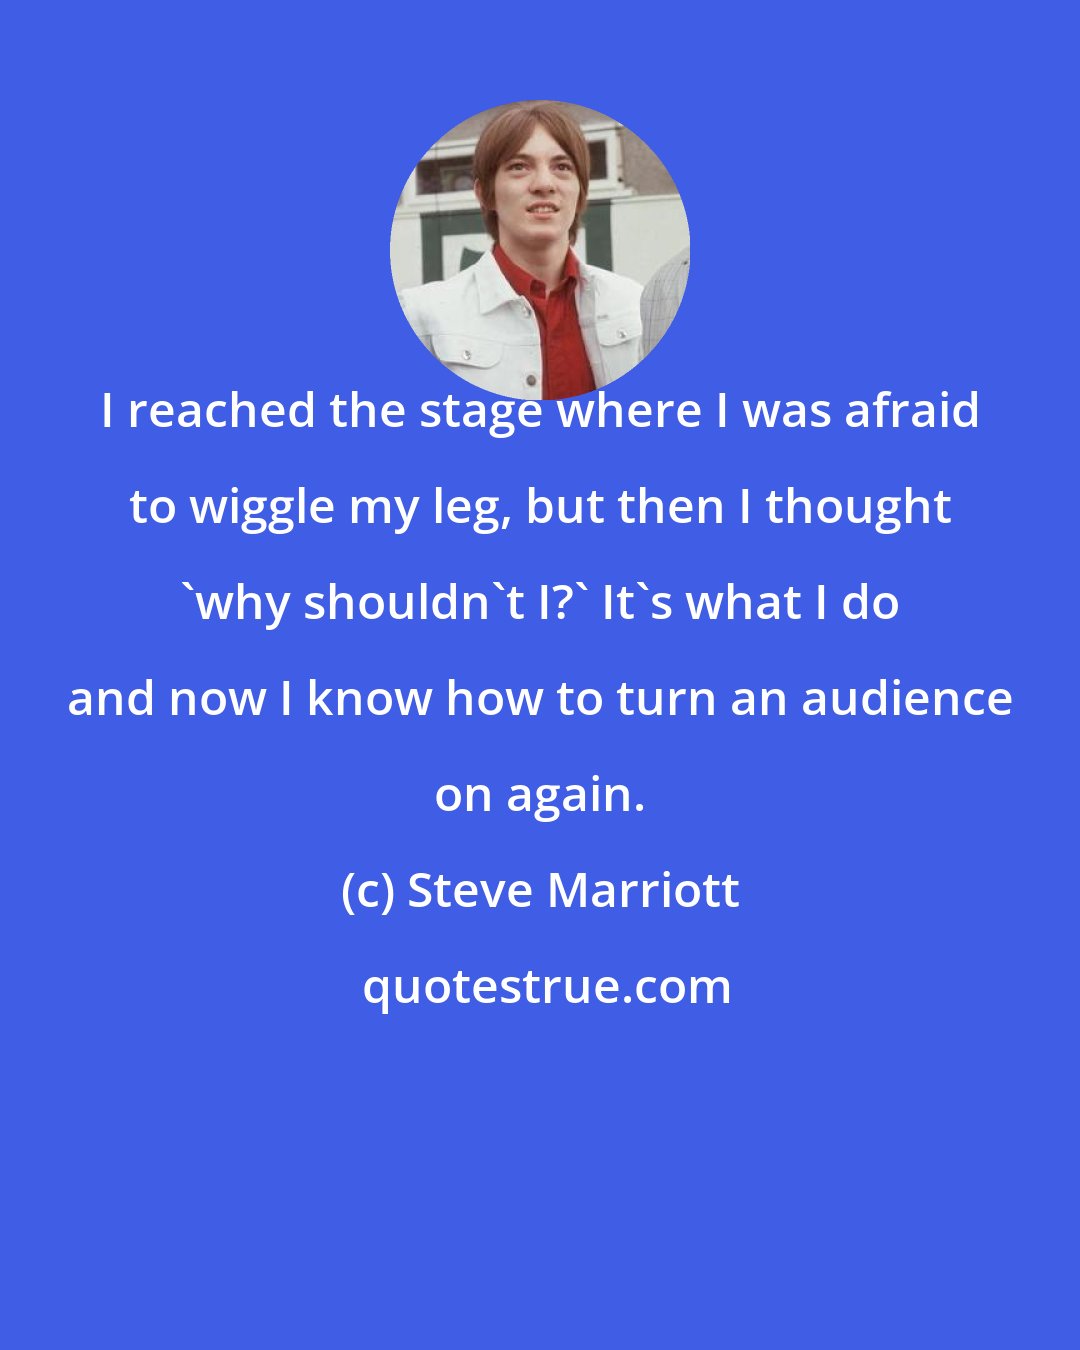 Steve Marriott: I reached the stage where I was afraid to wiggle my leg, but then I thought 'why shouldn't I?' It's what I do and now I know how to turn an audience on again.